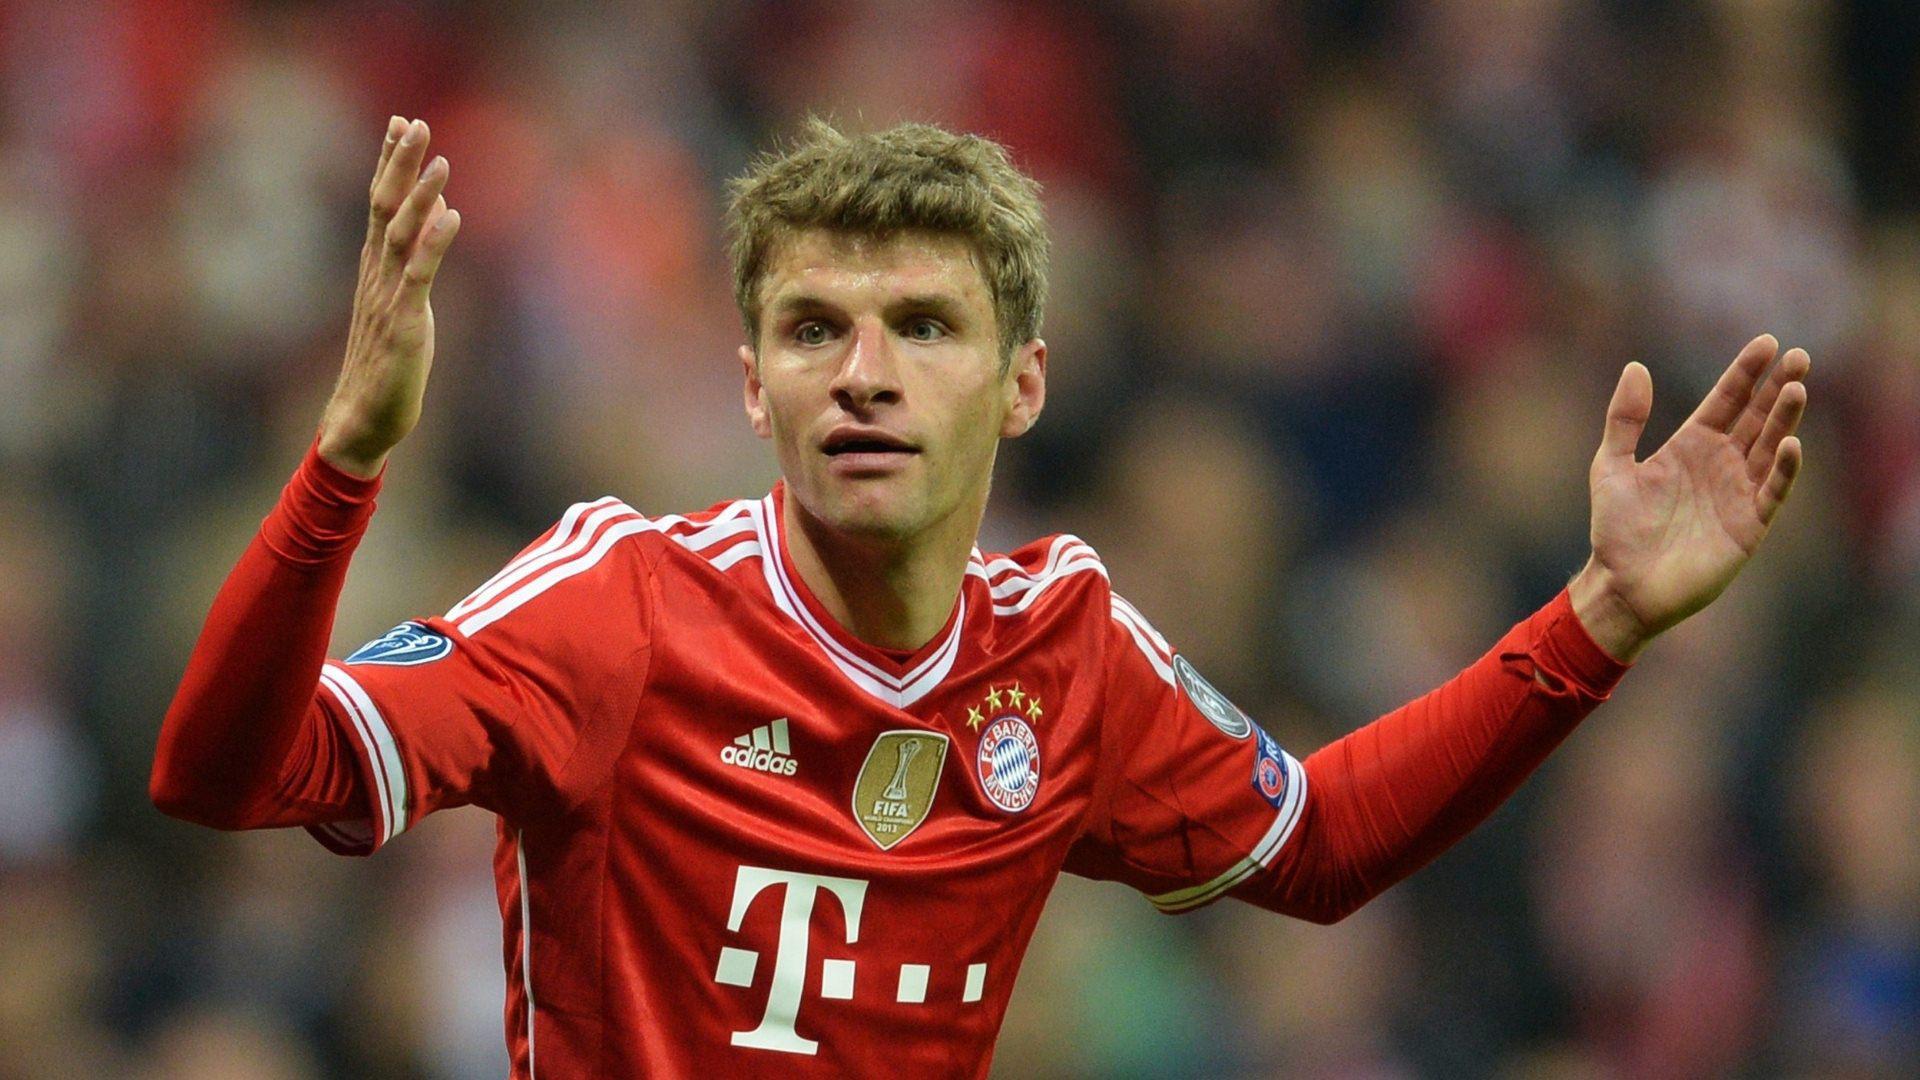 Thomas Muller Wallpapers Images Photos Pictures Backgrounds